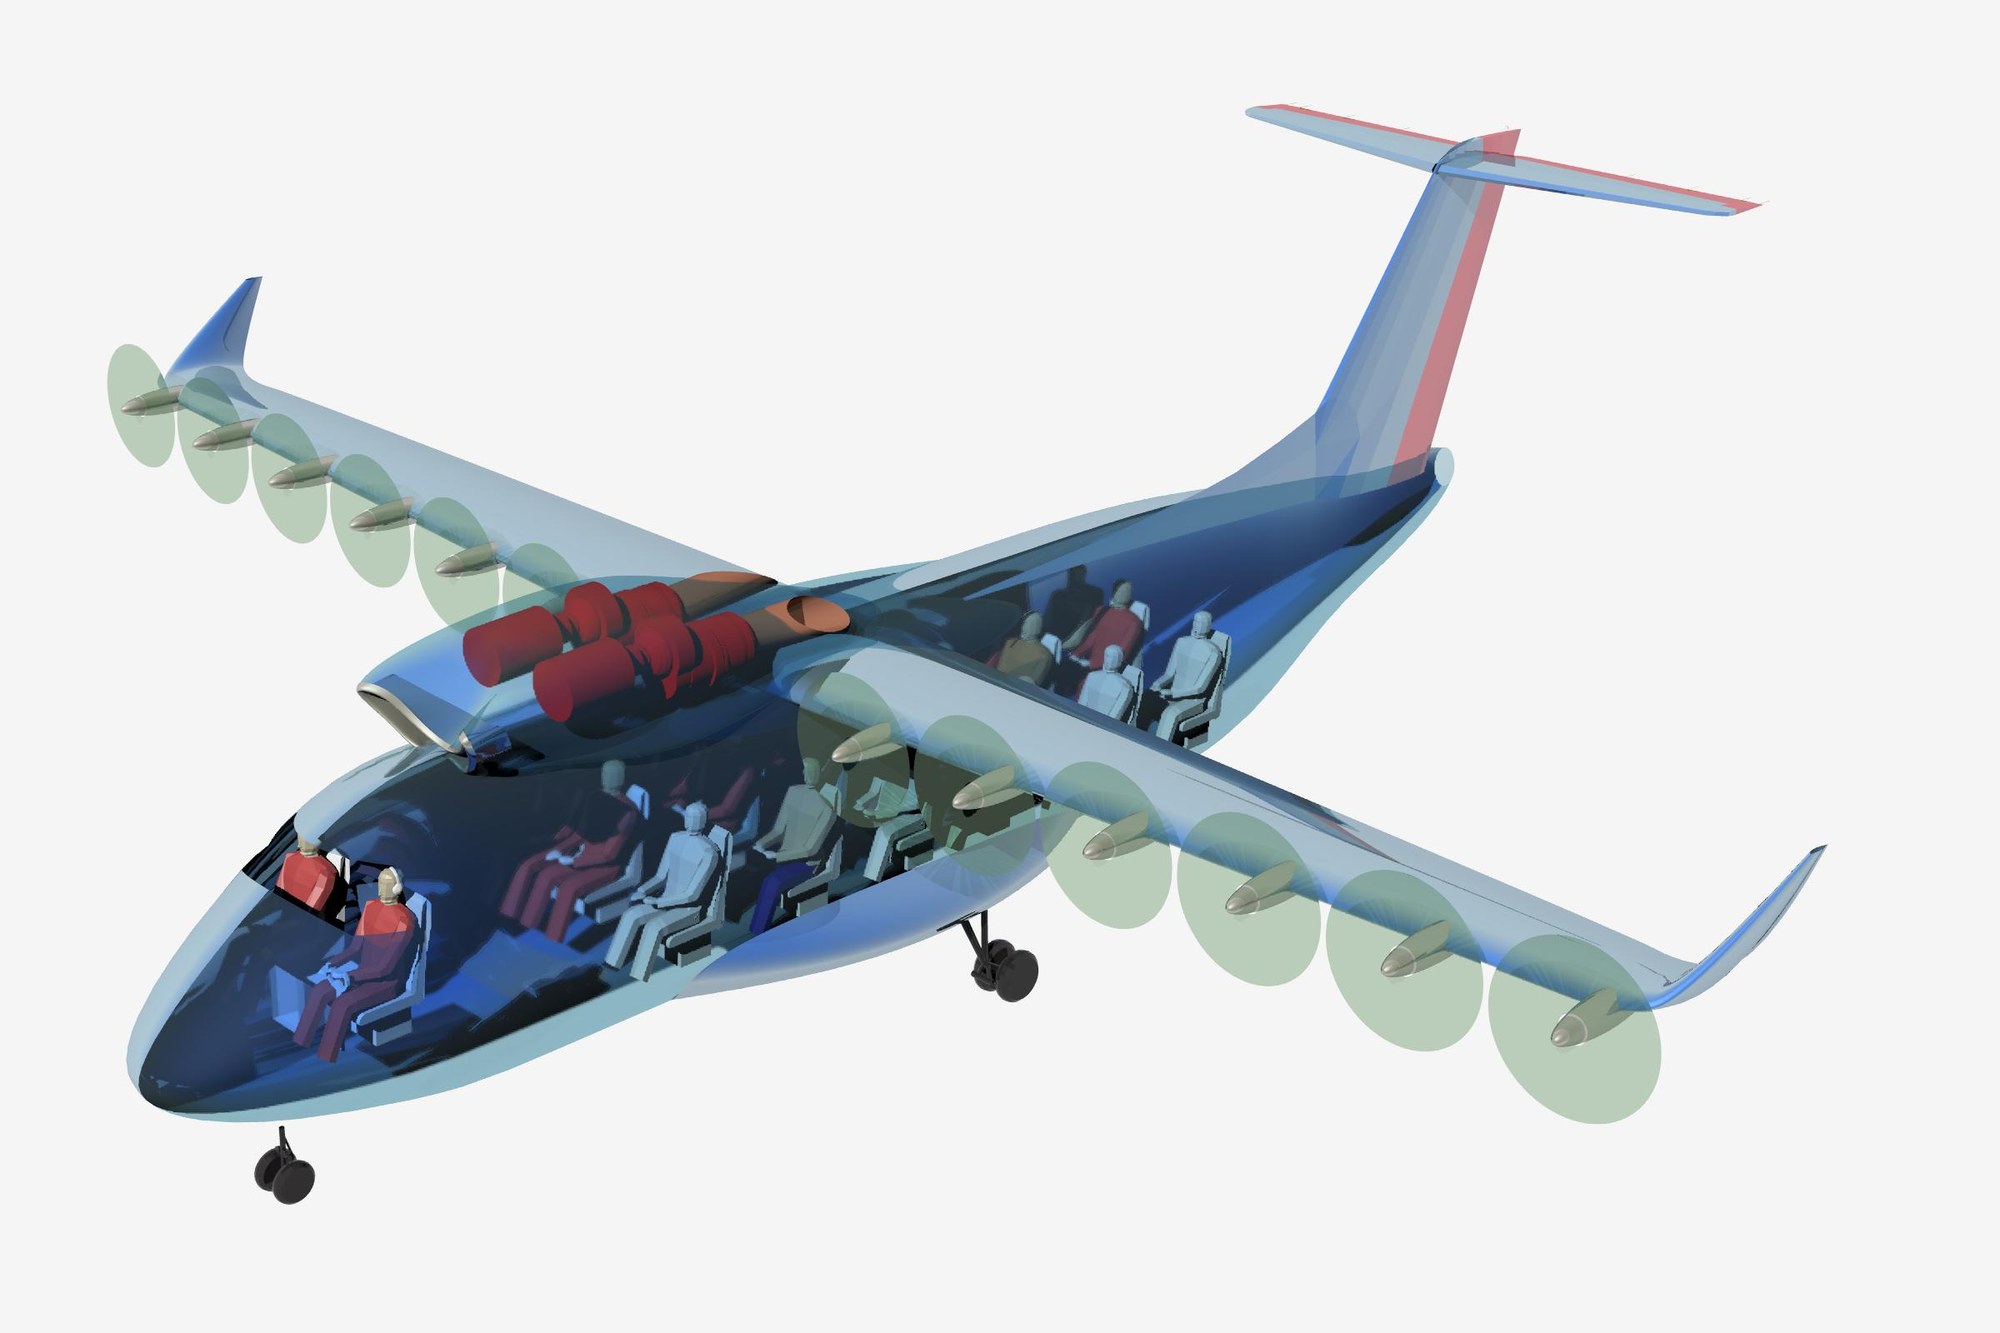 Nineteen-seater aircraft with distributed, electrically driven propellers